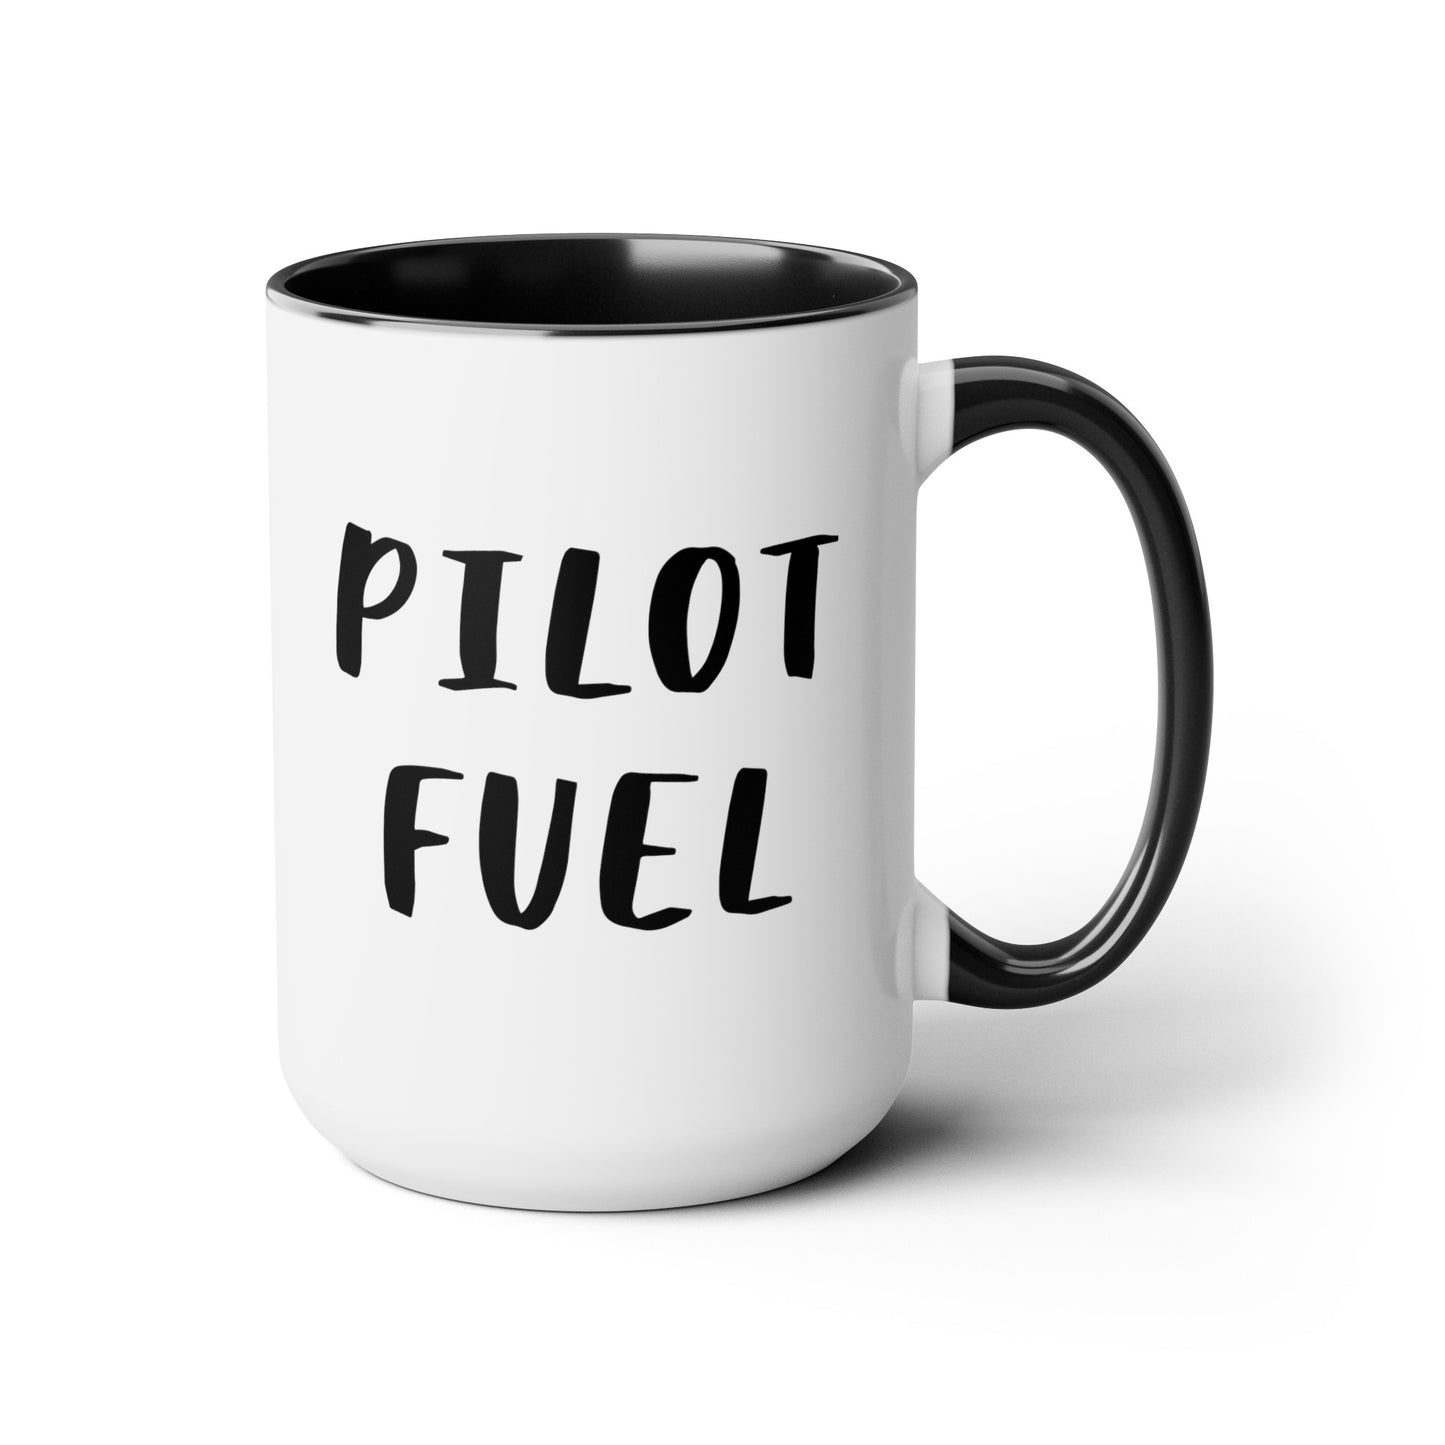 Pilot Fuel 15oz white with black accent funny large coffee mug gift for world's best pilot present waveywares wavey wares wavywares wavy wares